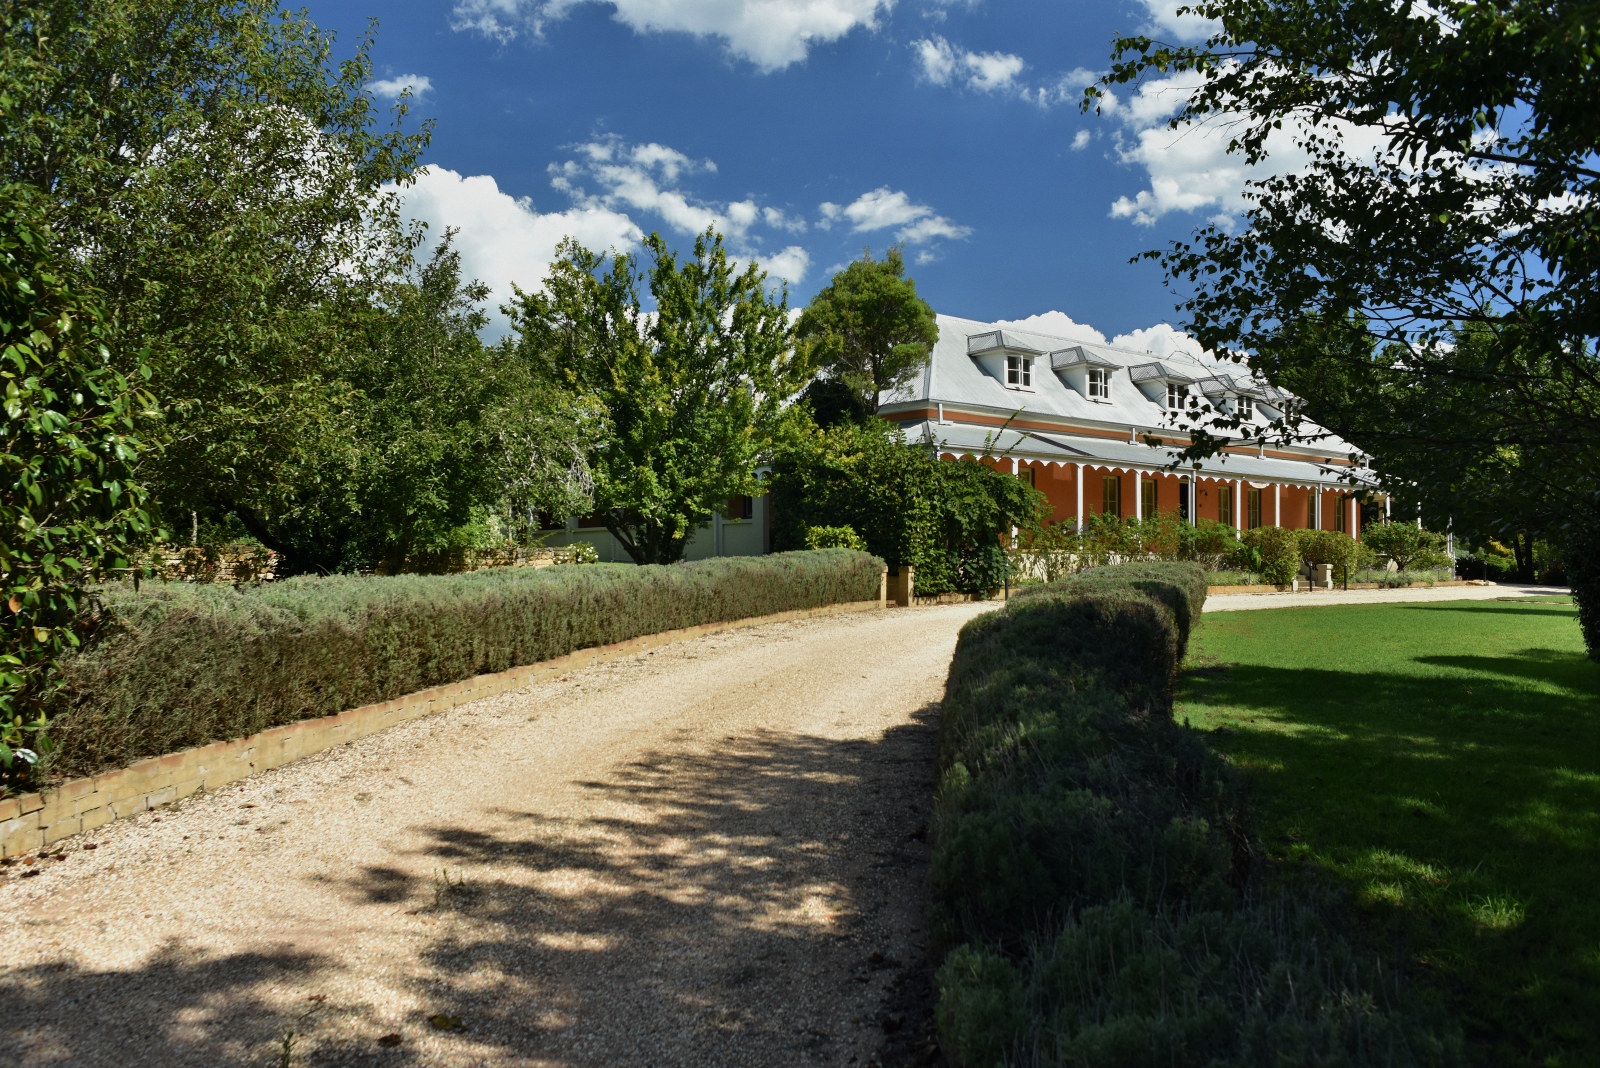 Australian lifestyle photography. The historic Fitzroy Inn Mittagong, Southern Highlands; seen from the long gravel drive and surrounging gardens. Travel and garden photography by Kent Johnson.